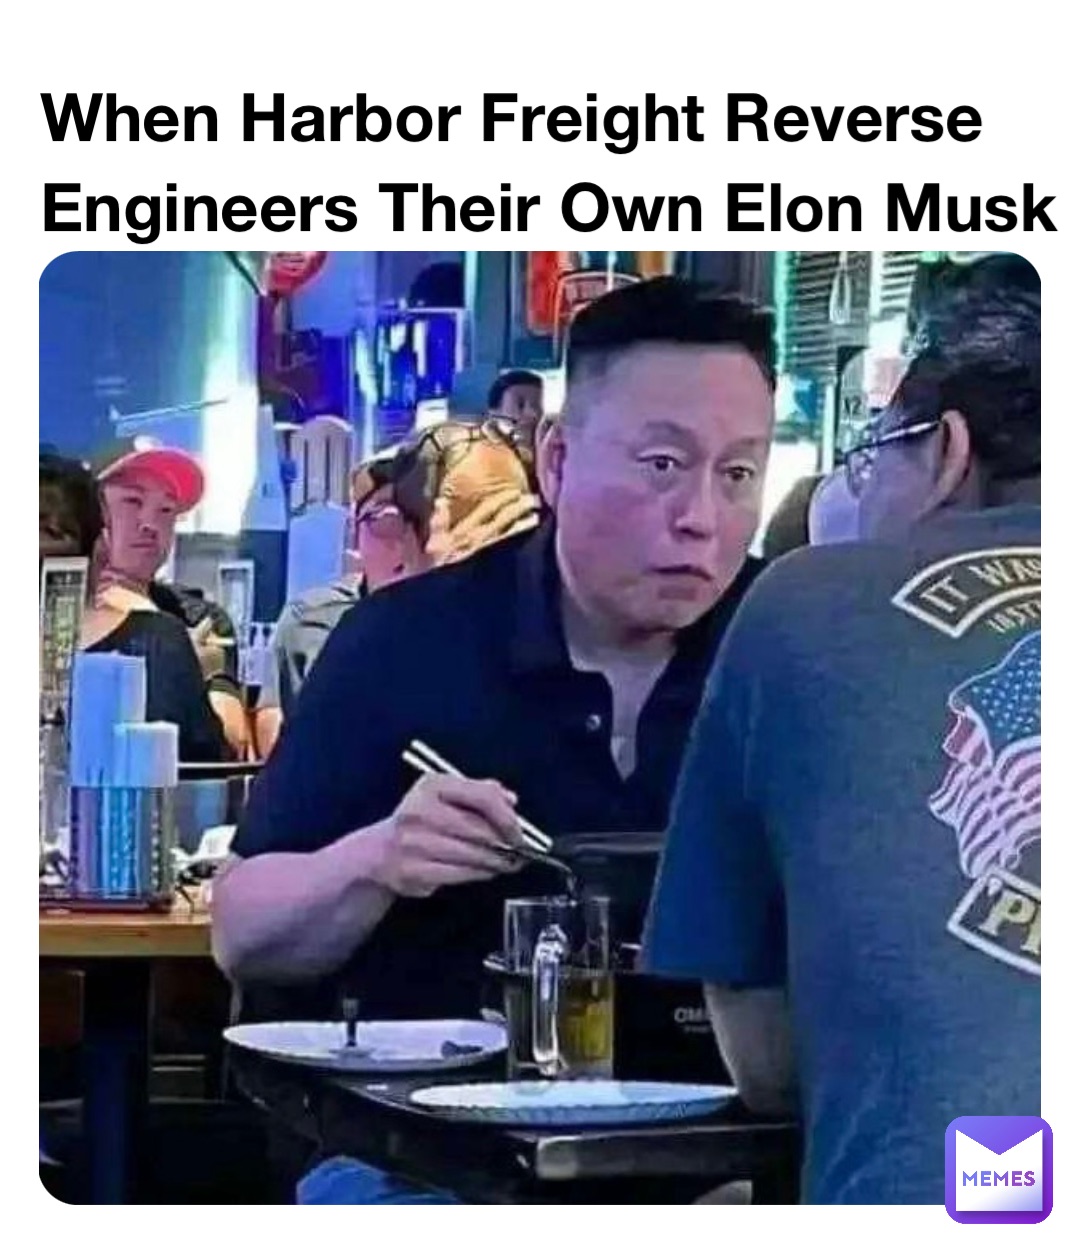 When Harbor Freight Reverse Engineers Their Own Elon Musk